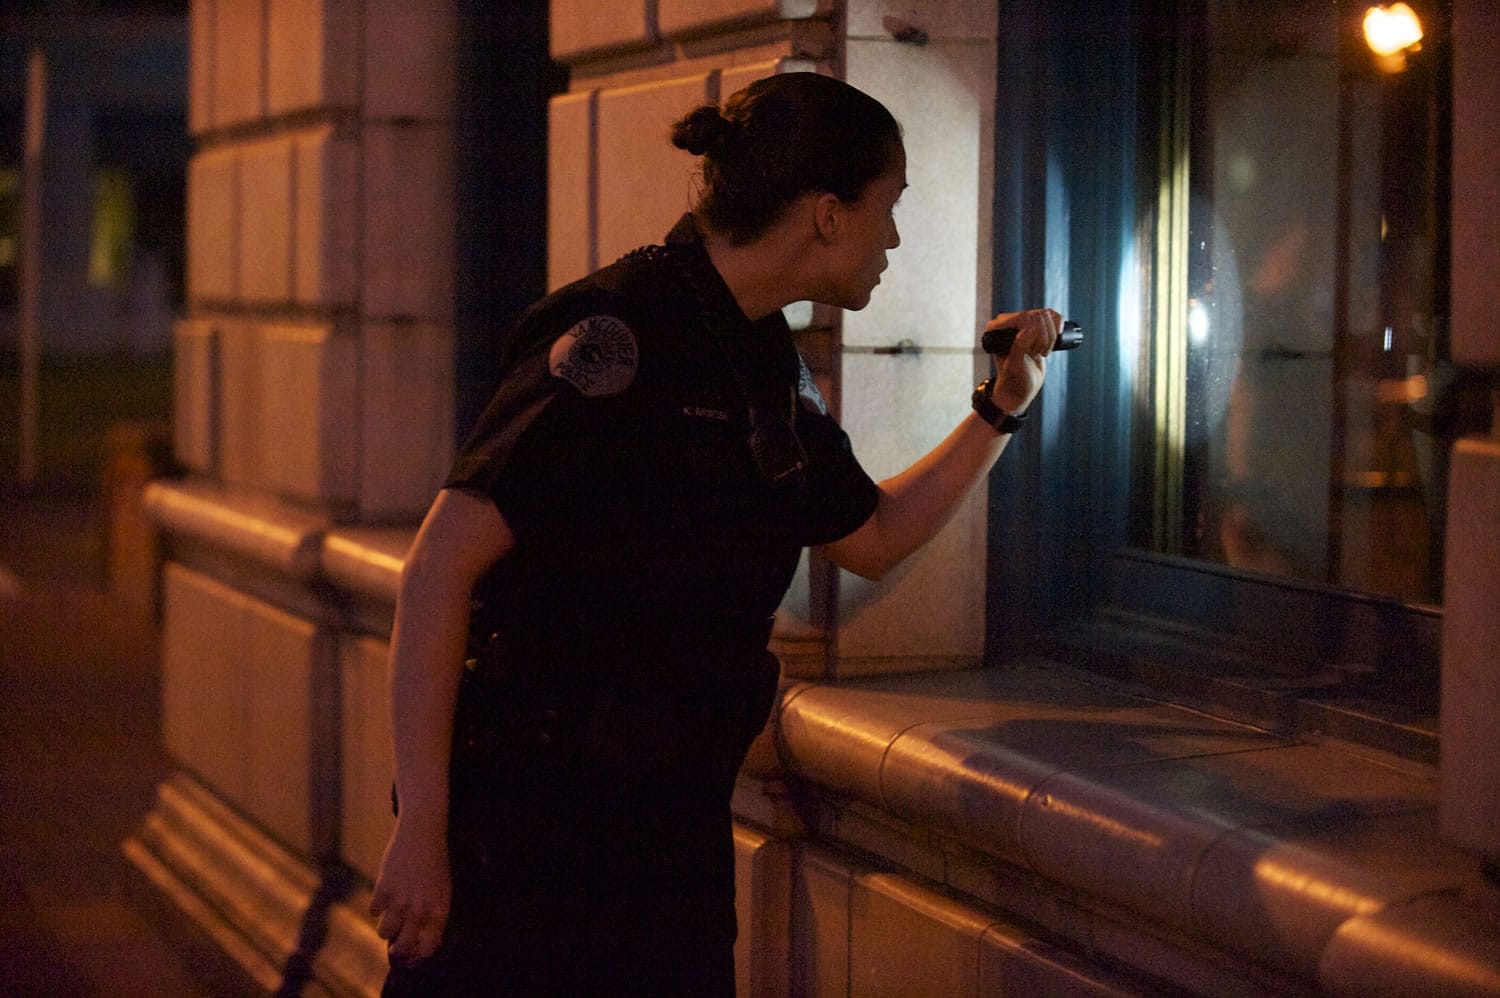 Officer Katie Endresen on patrol during the graveyard shift on Wednesday.